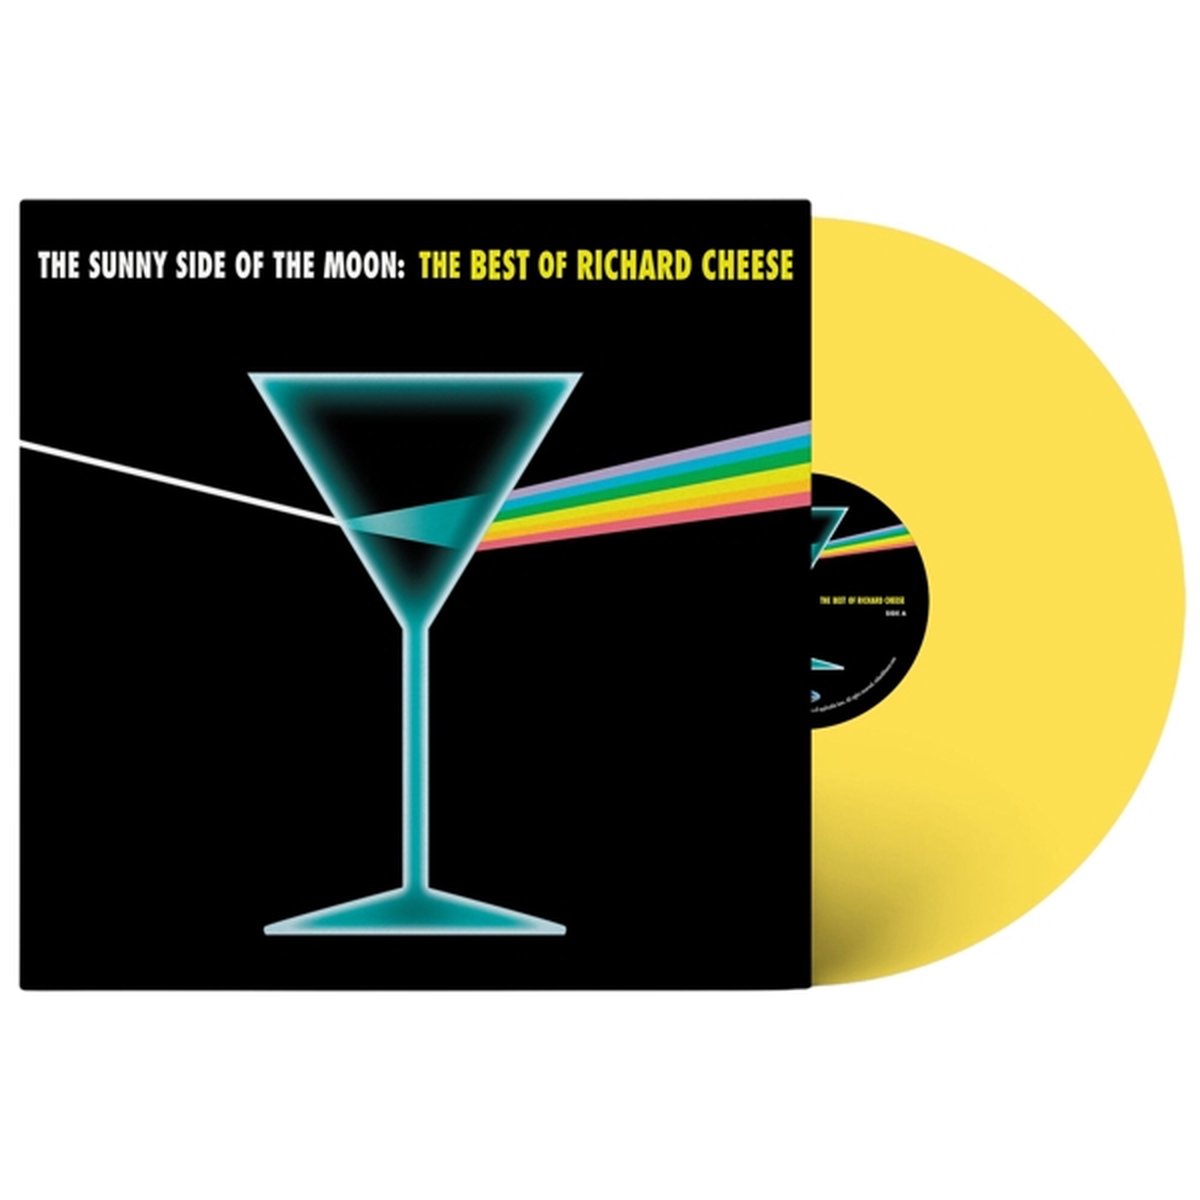 The Sunny Side of the Moon - Richard Cheese